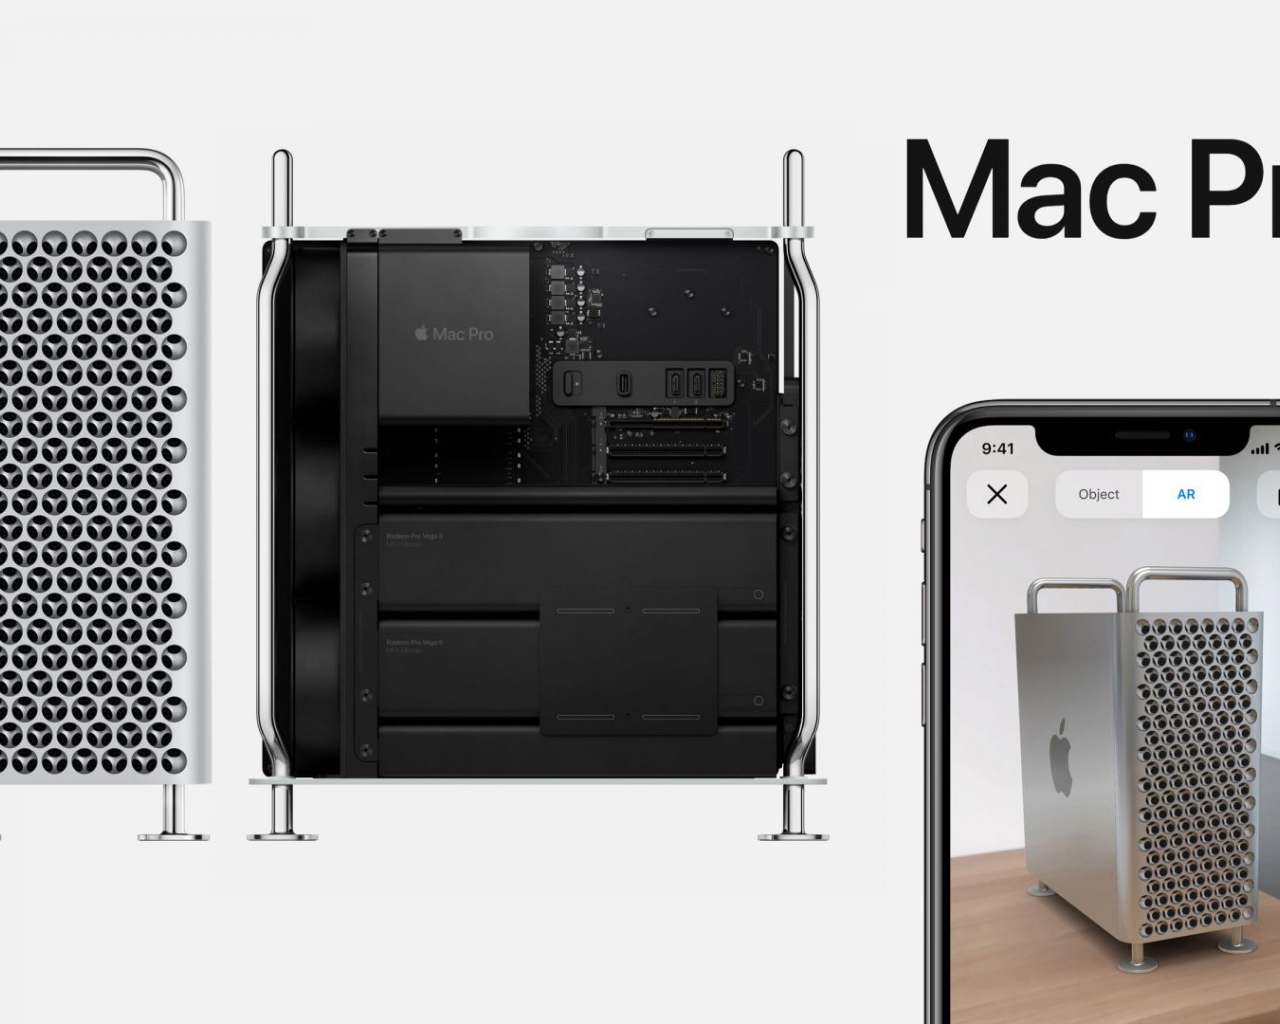 Mac Pro Workstation 2019 from Apple